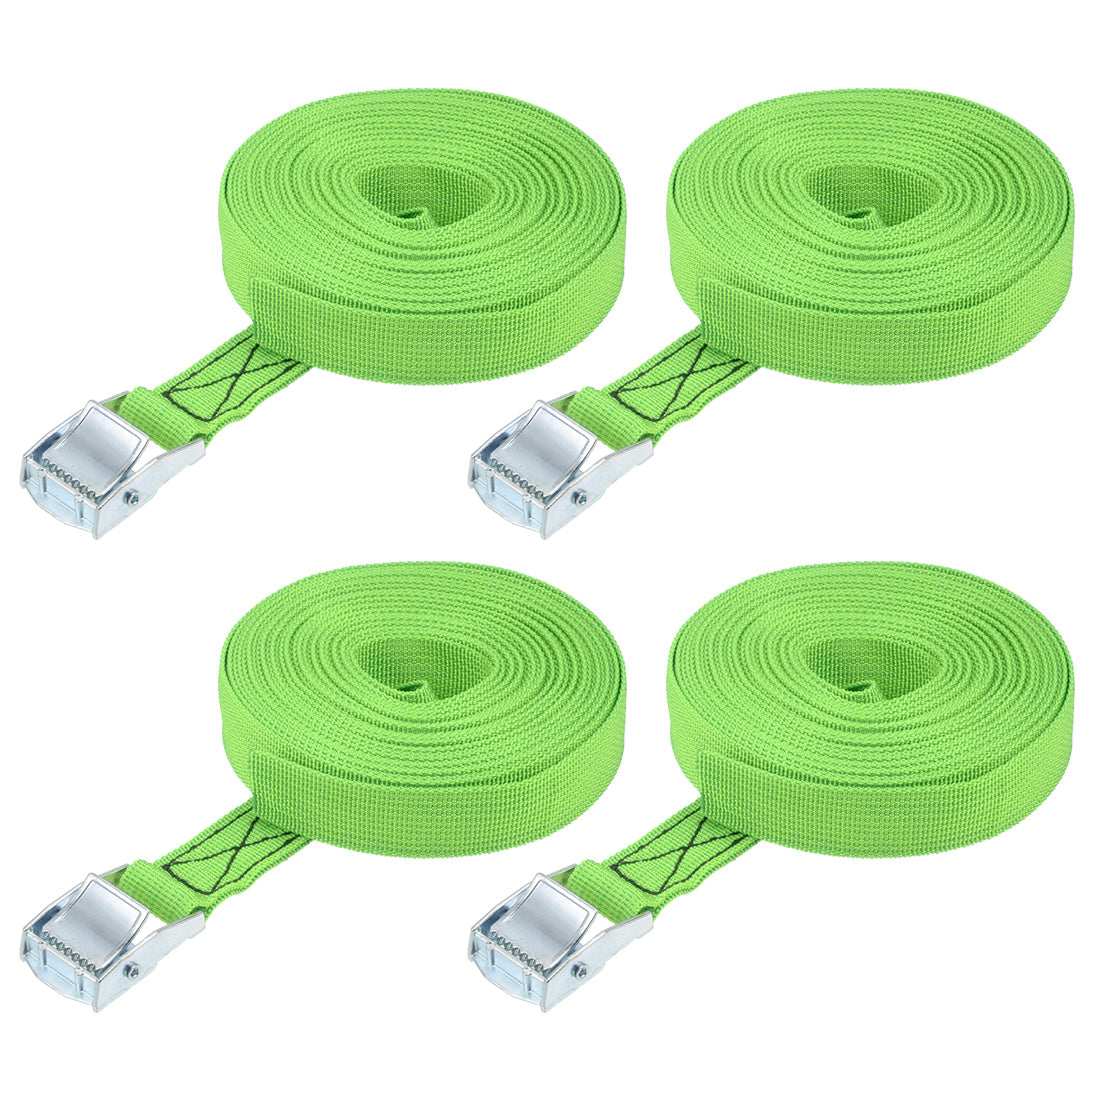 uxcell Uxcell Lashing Strap 1" x 23' Cargo Tie Down Straps with Cam Lock Buckle Up to 551lbs Green 4pcs